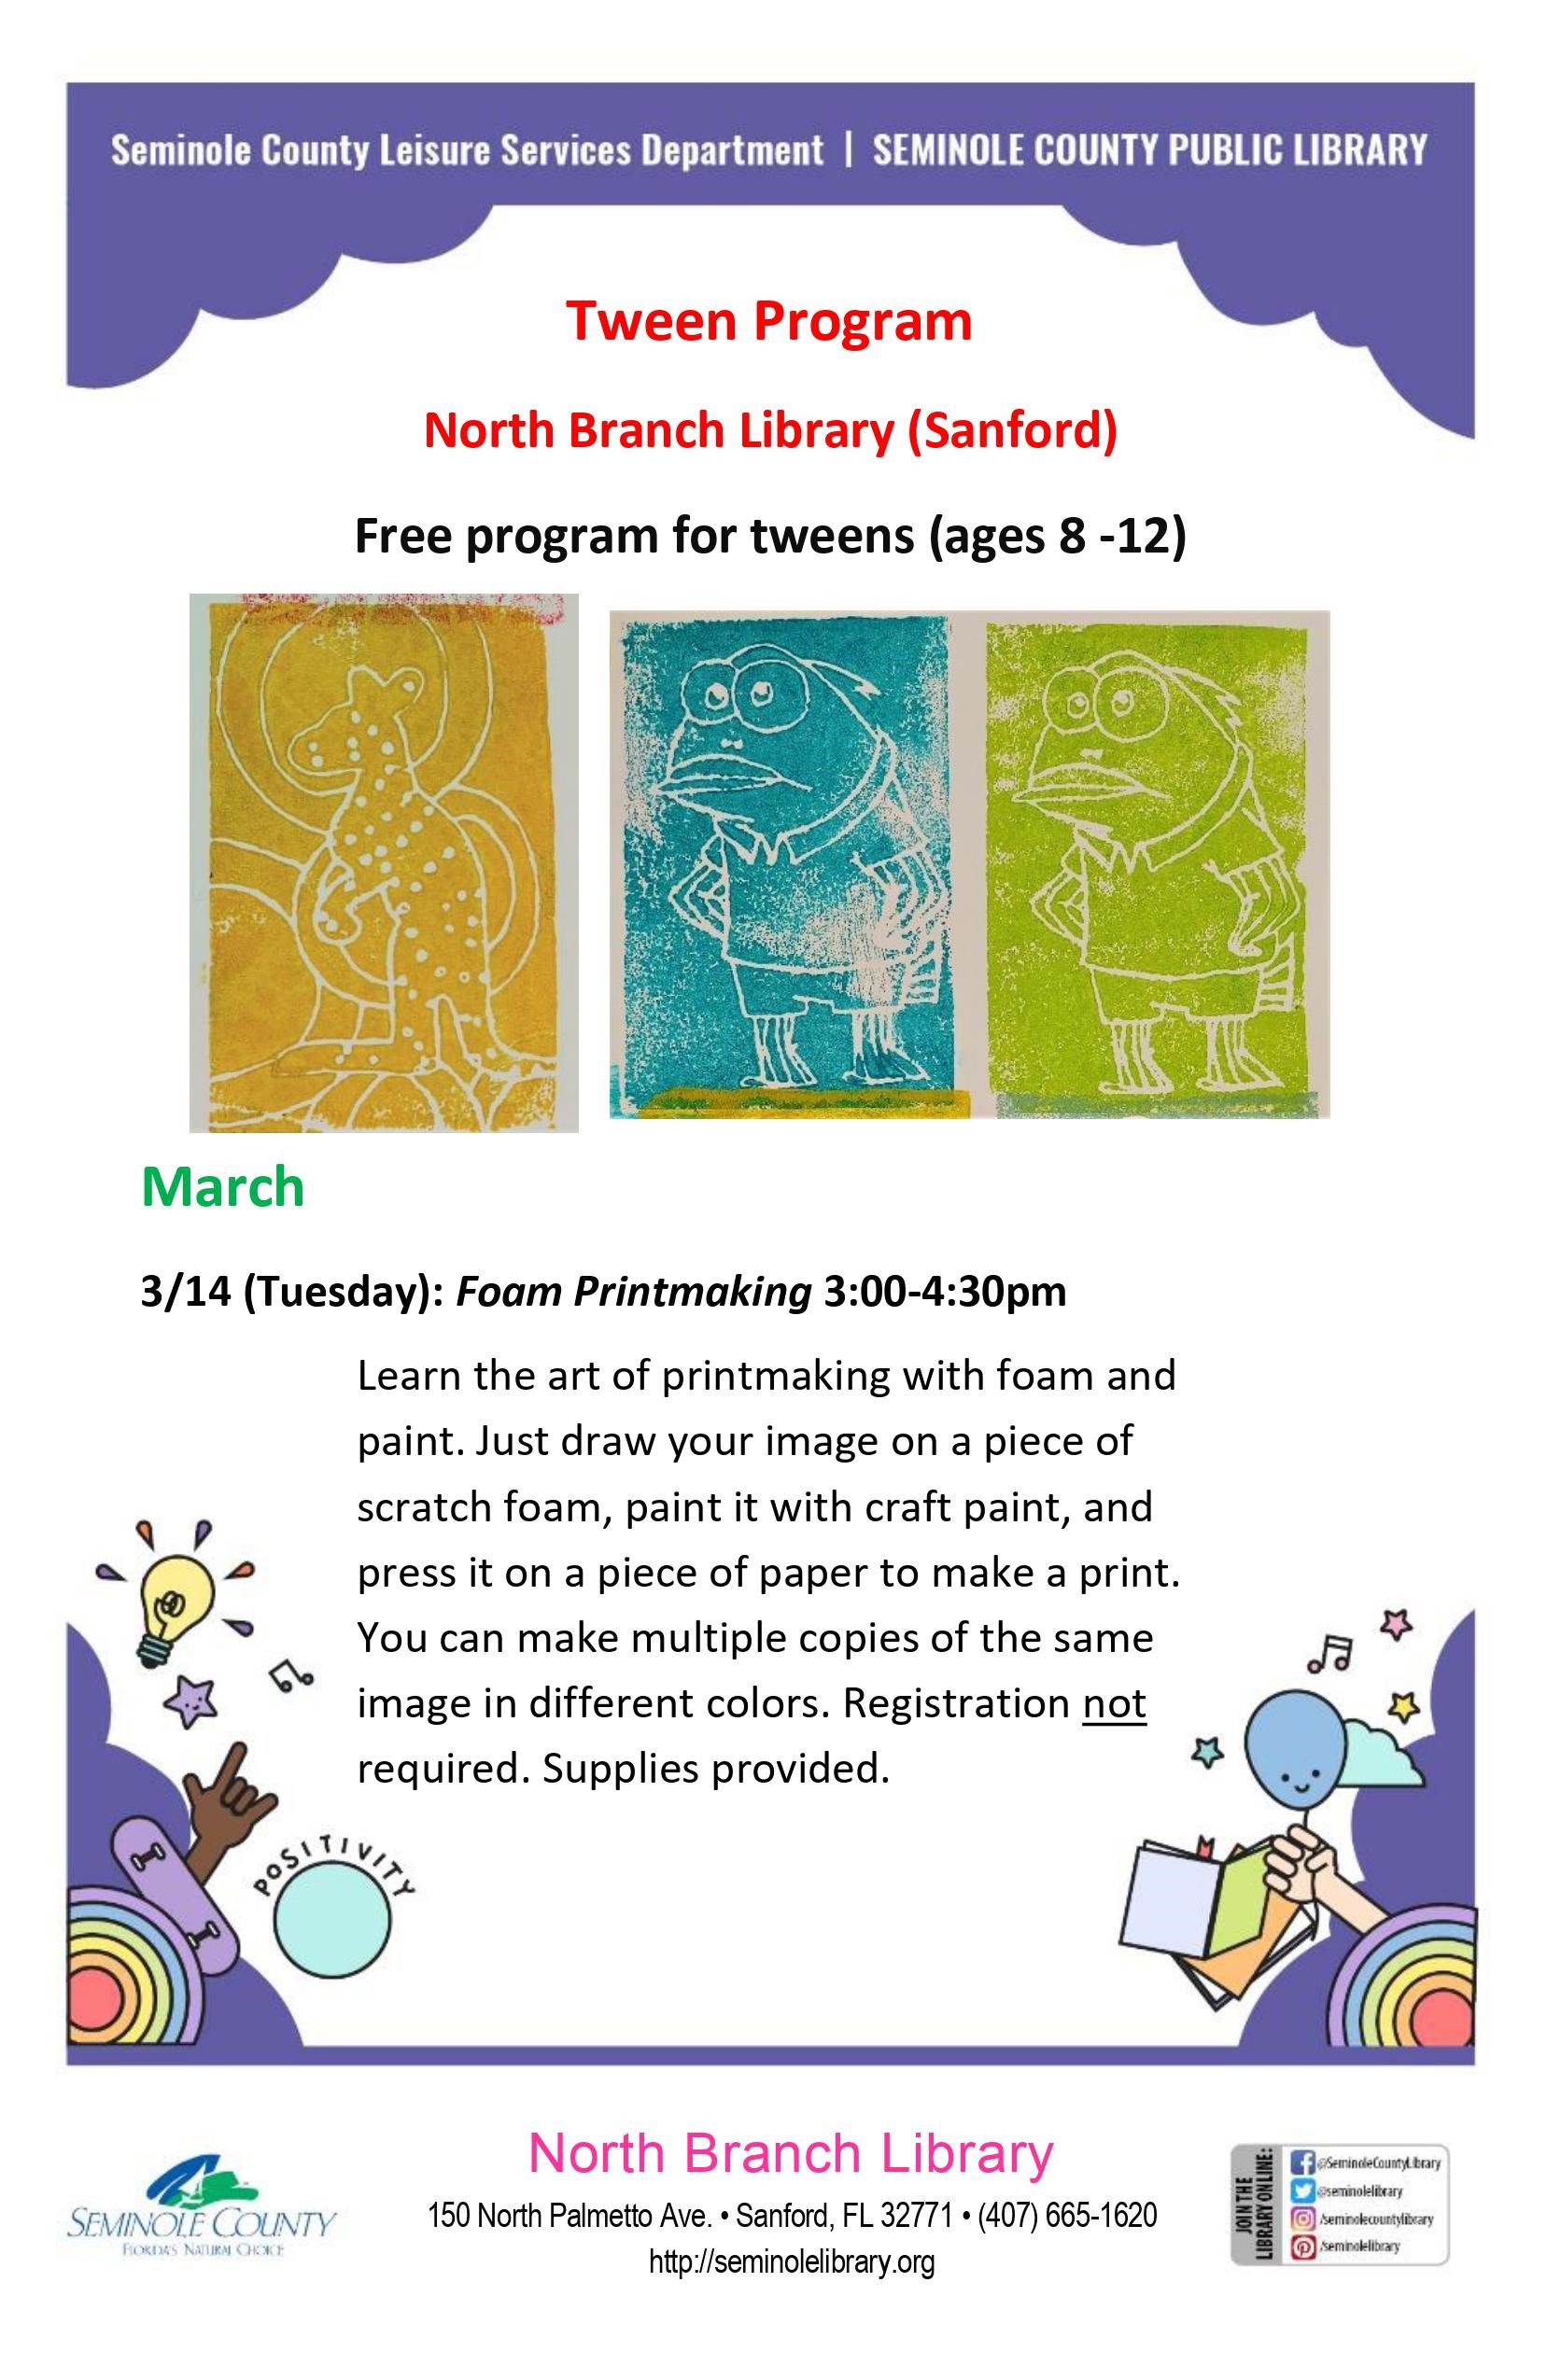 Tween Printmaking at the North Branch Library